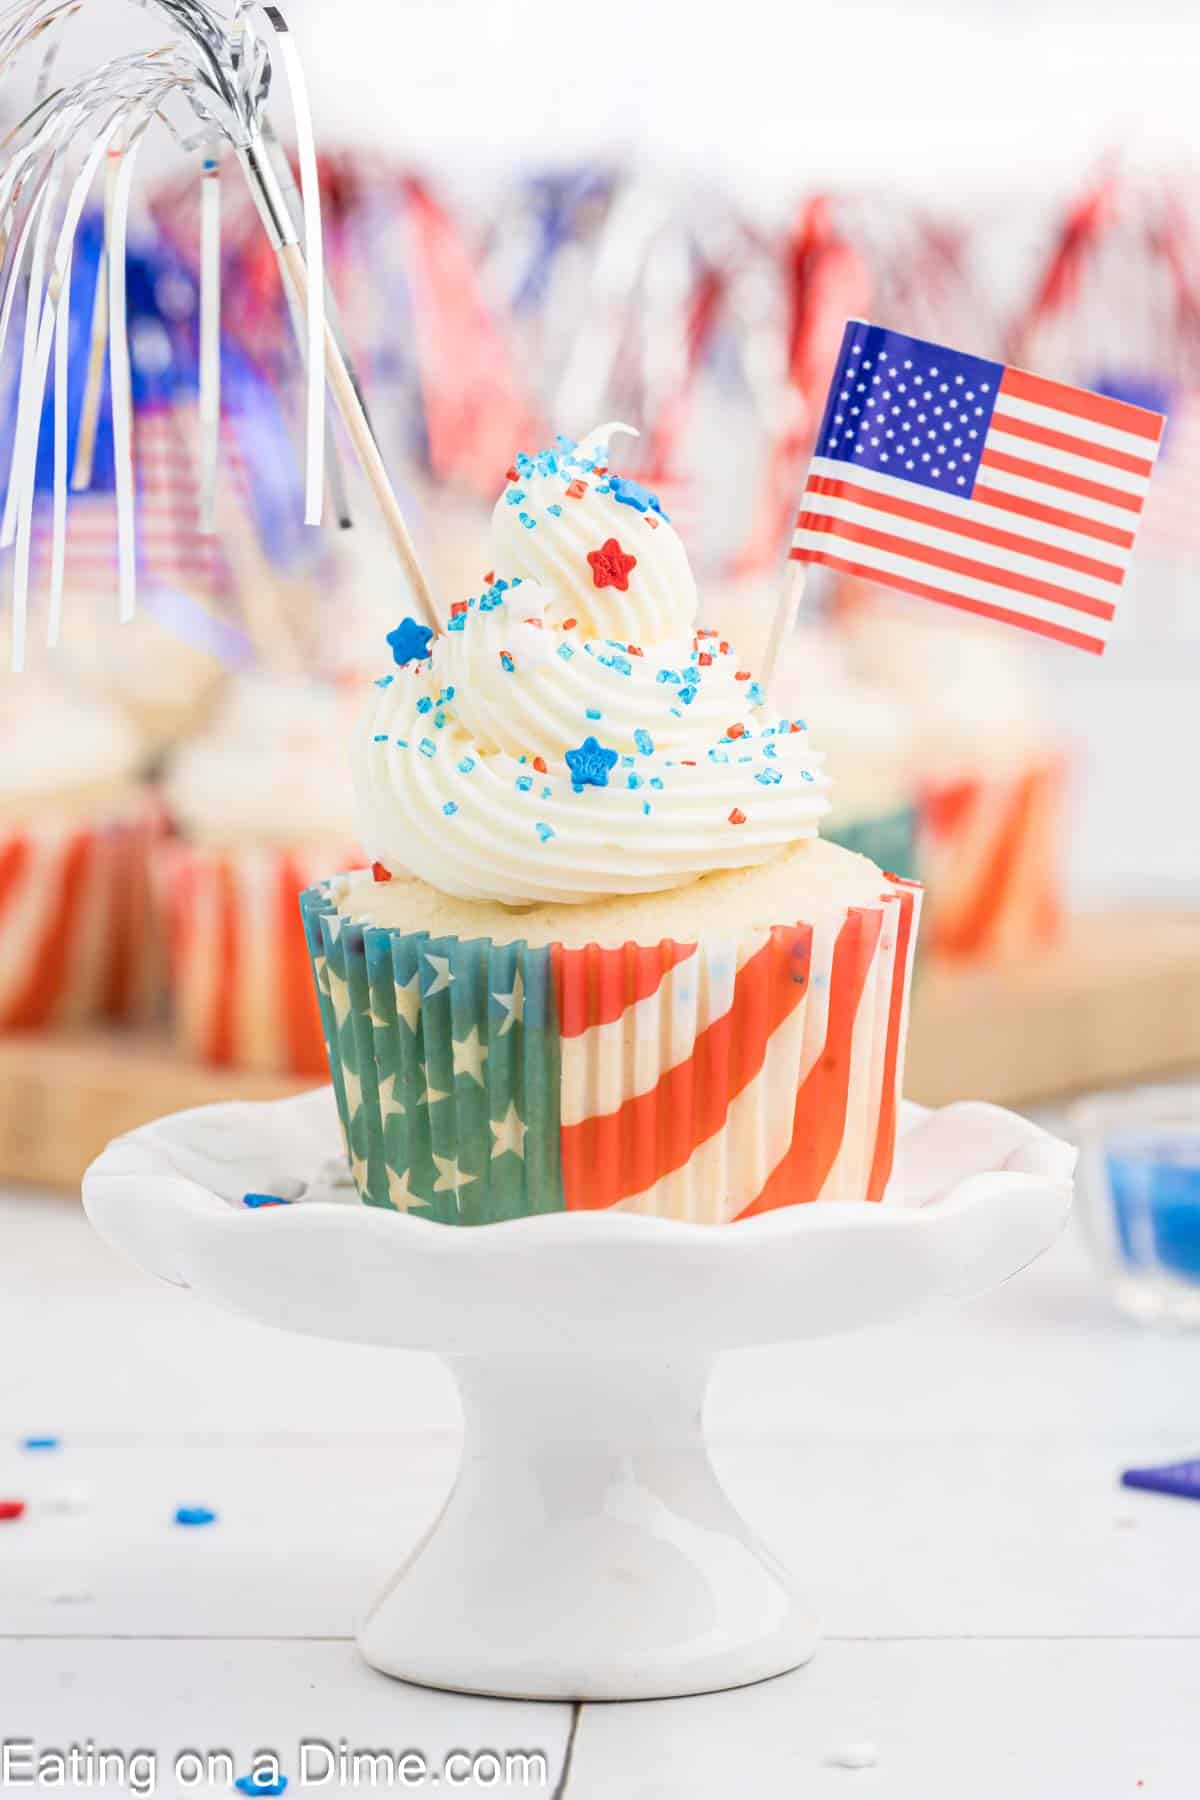 A patriotic Firecracker Cupcake with white frosting, blue and red star sprinkles, and a small American flag on top. The cupcake liner features the American flag design. It sits on a white cake stand with more decorated cupcakes blurred in the background.